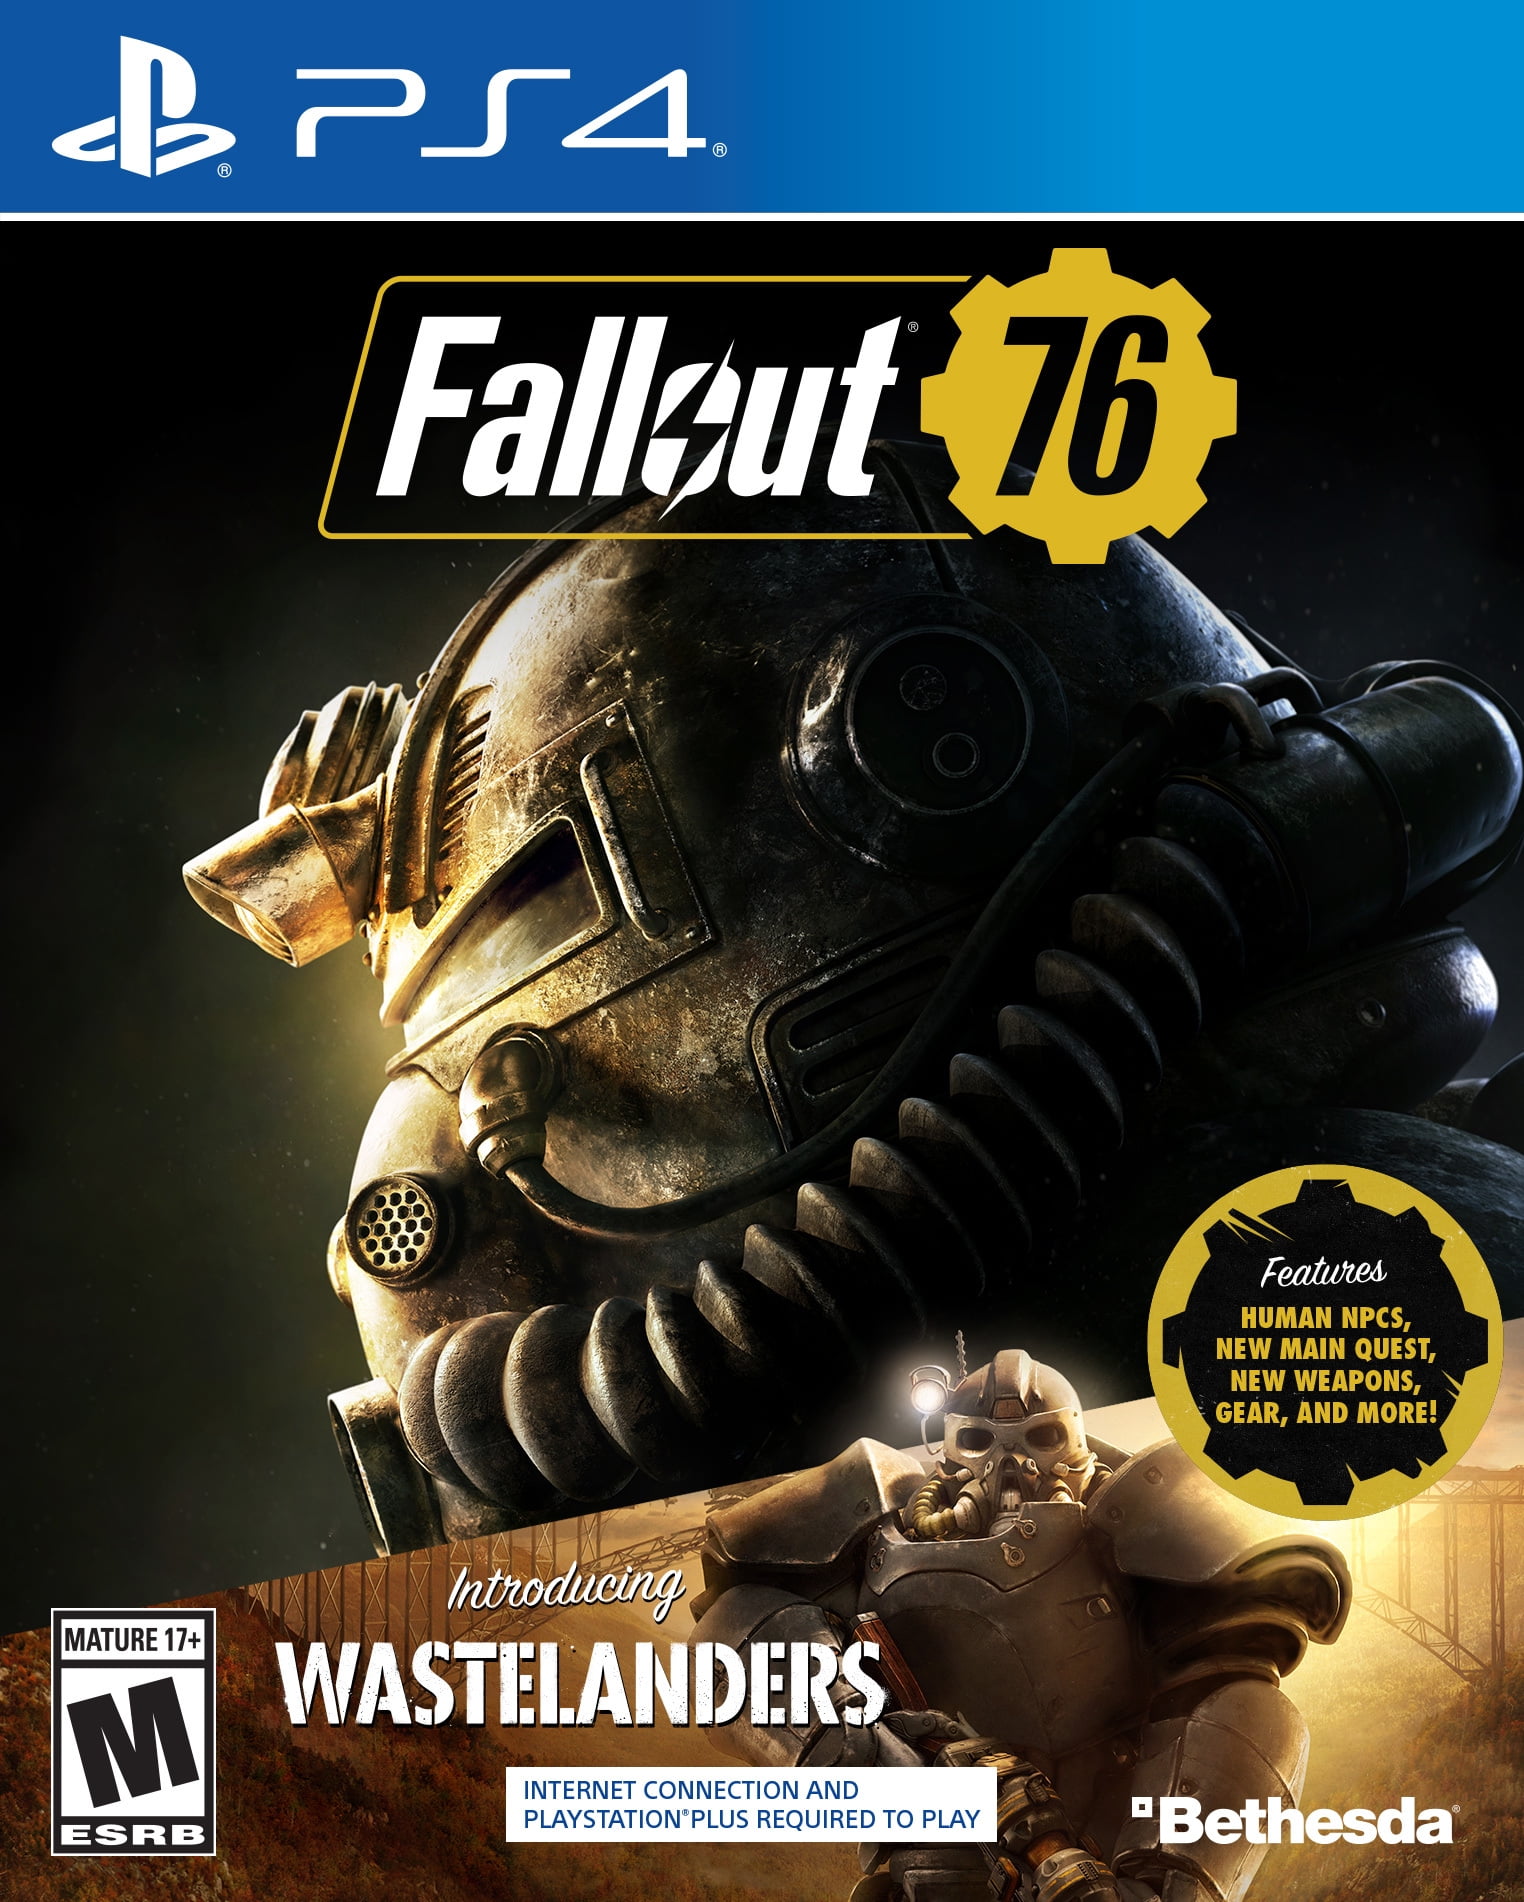 fallout 76 tricentennial edition xbox store